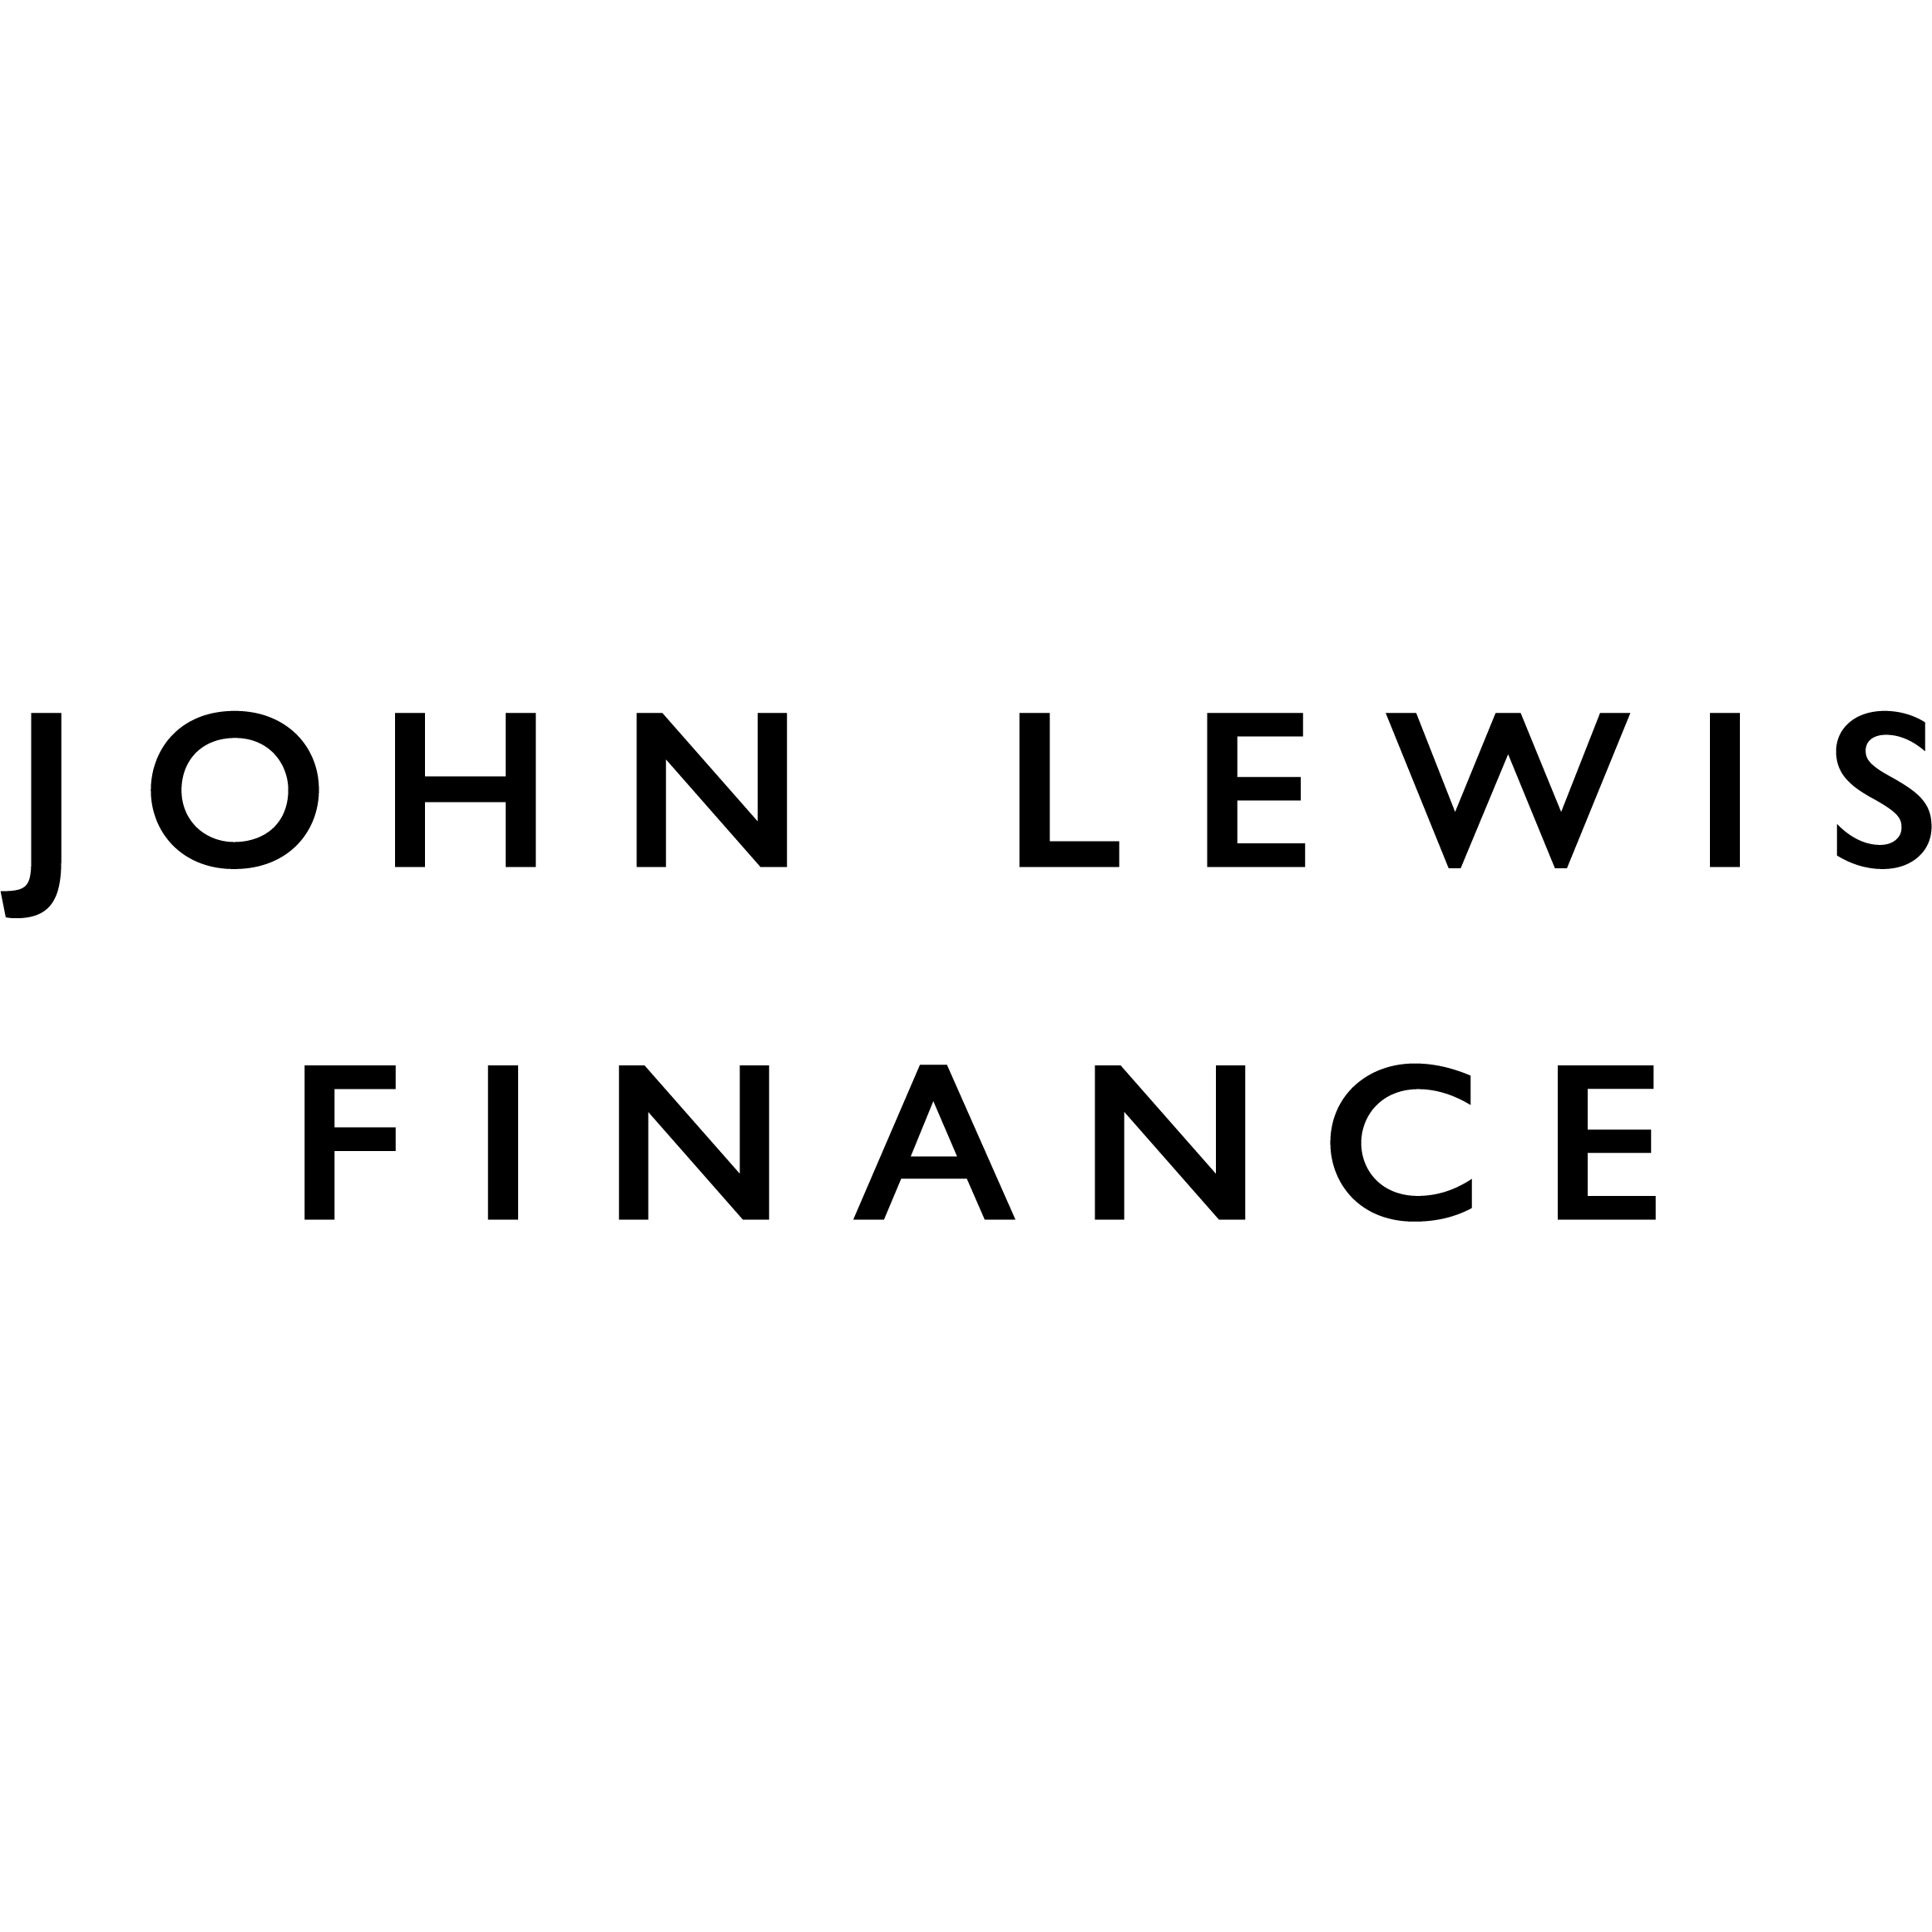 For over 150 years, Britain has trusted John Lewis to deliver quality products at competitive prices John Lewis Bureau de Change High Wycombe High Wycombe 03301 233396